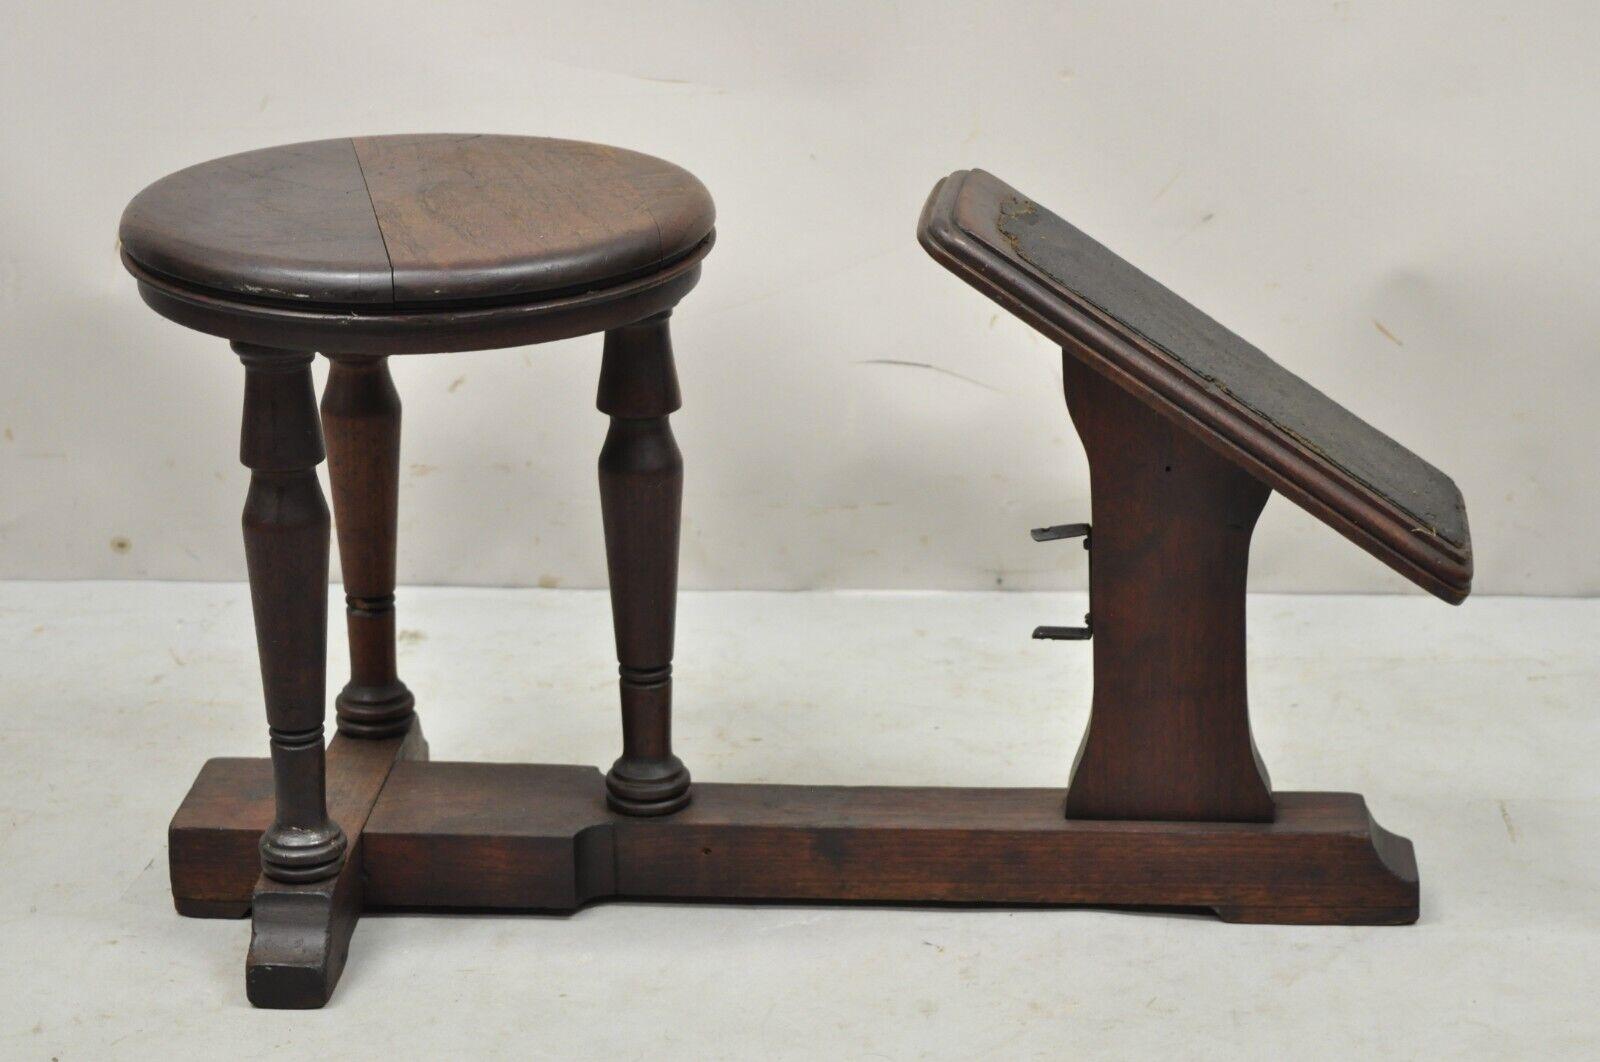 Antique Jacobean Walnut Salesman sizing fitting stool bench foot rest. round walnut seat, angled footrest, solid wood construction, beautiful wood grain, very nice antique item, great style and form. Circa early 1900s. Measurements: 14